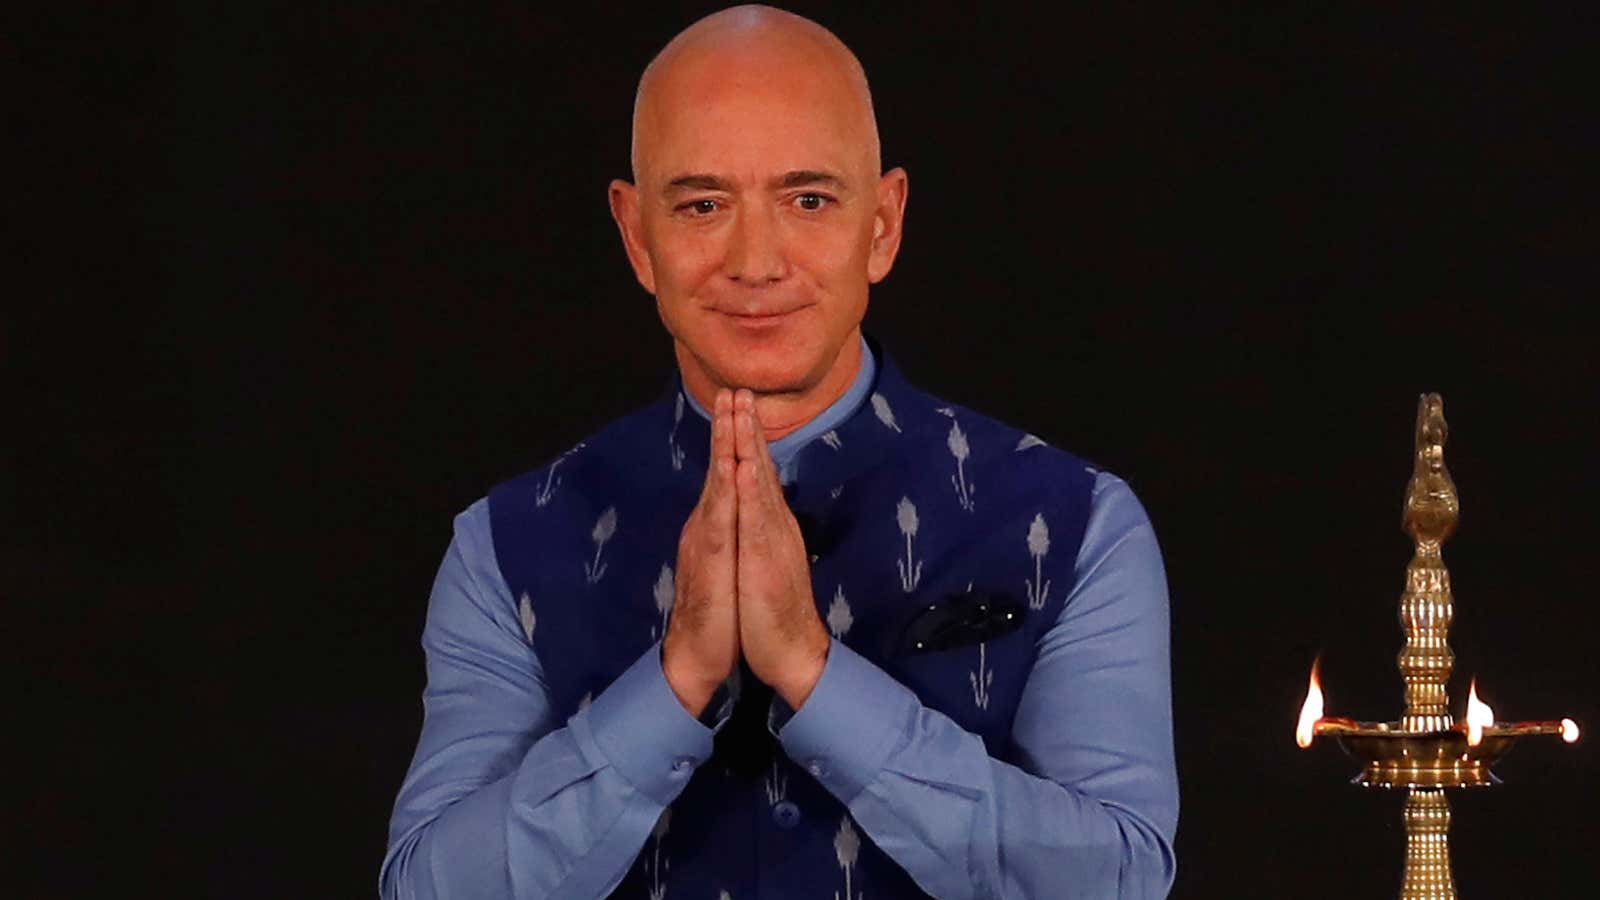 Jeff Bezos would like to decline your meeting request.